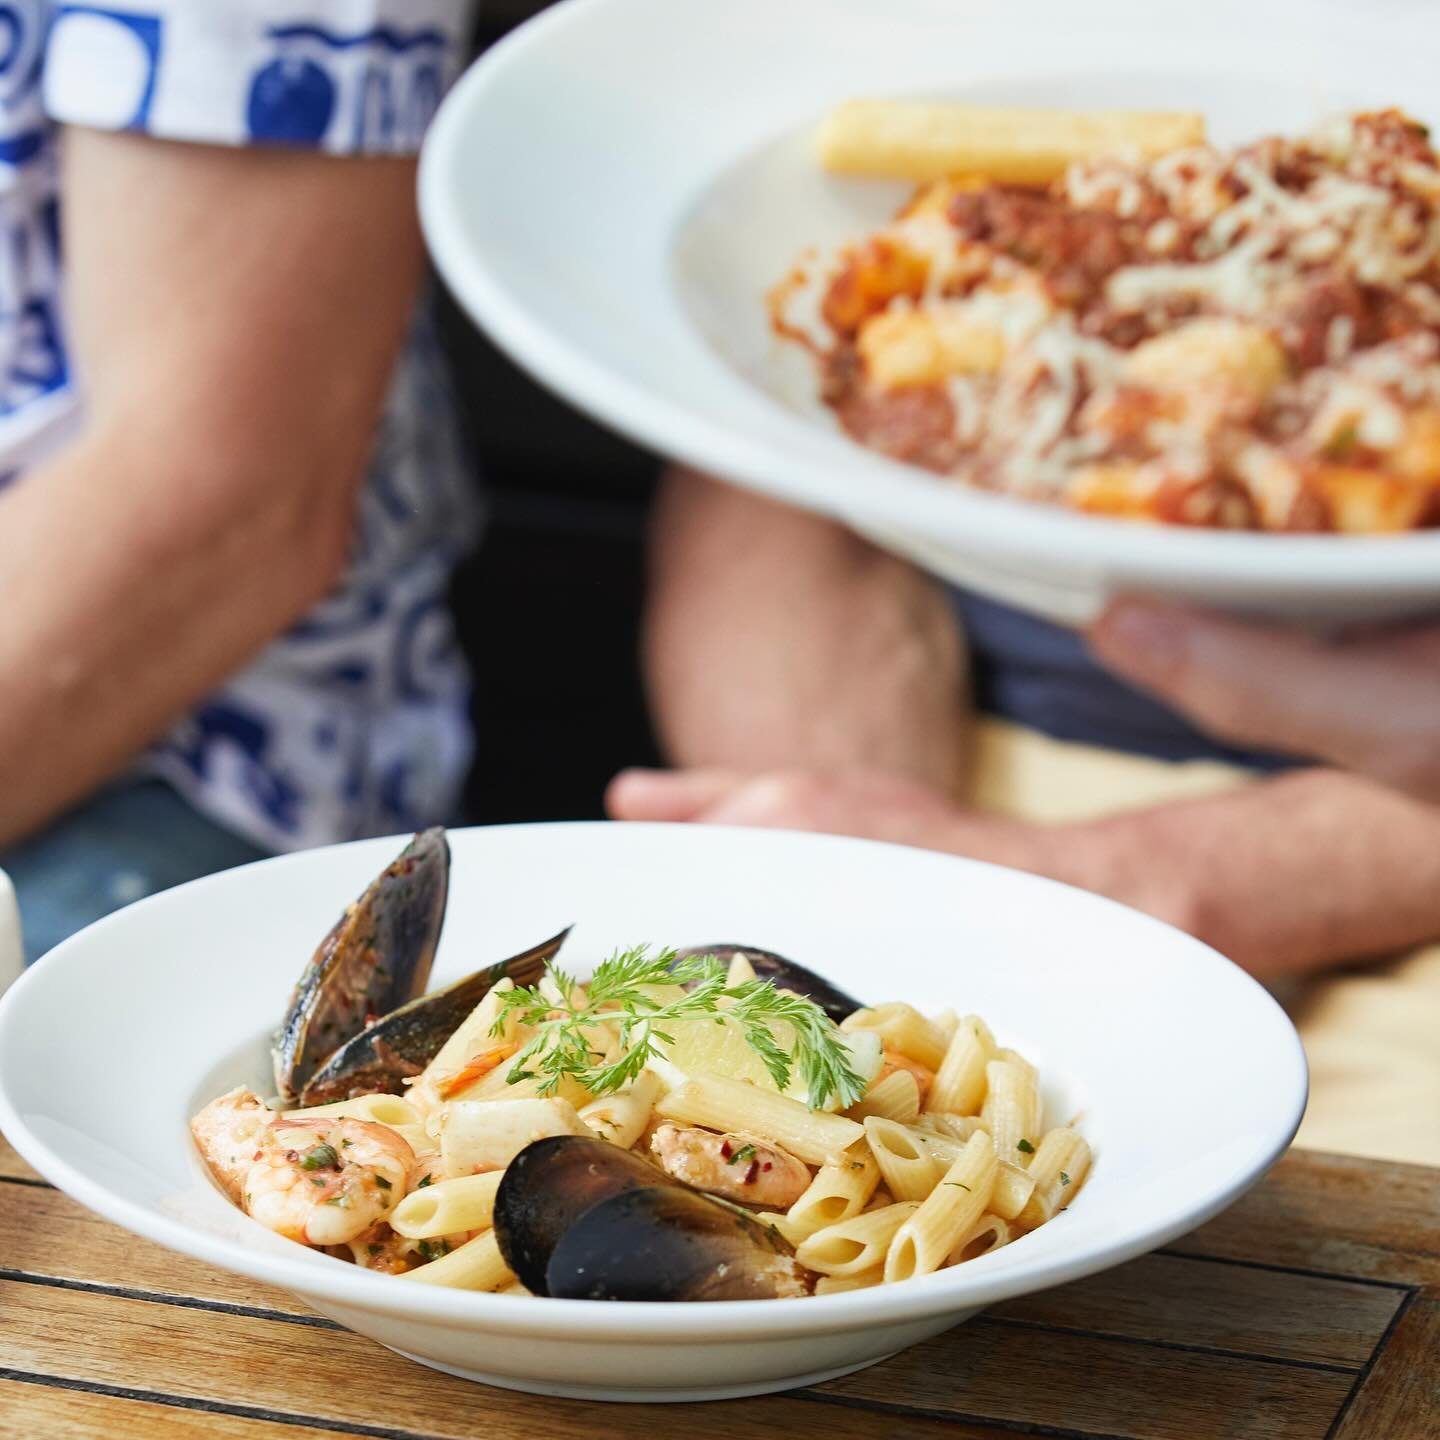 Time for a catch up with your mates? Tell them to meet you for lunch or dinner at the Peacock. Our seasonal menu is full of delicious bistro-style dishes and pub classics. Plus our chef specials change weekly.

Book a table in our stylish front room 